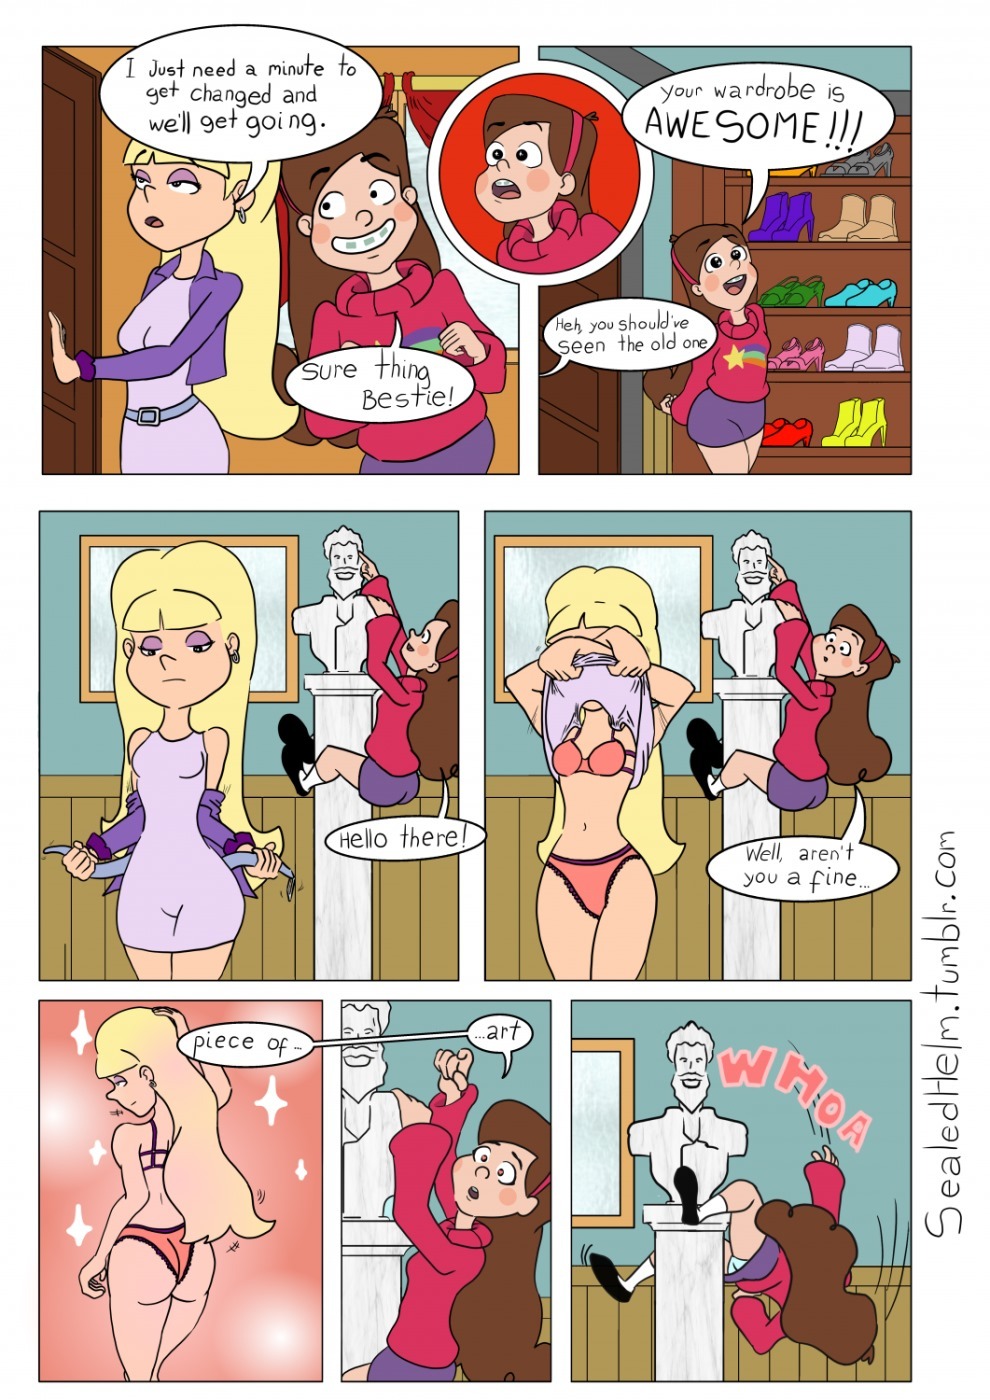 Pacifica And Dipper Fucking - Mable X Pacifica - Gravity Falls - KingComiX.com